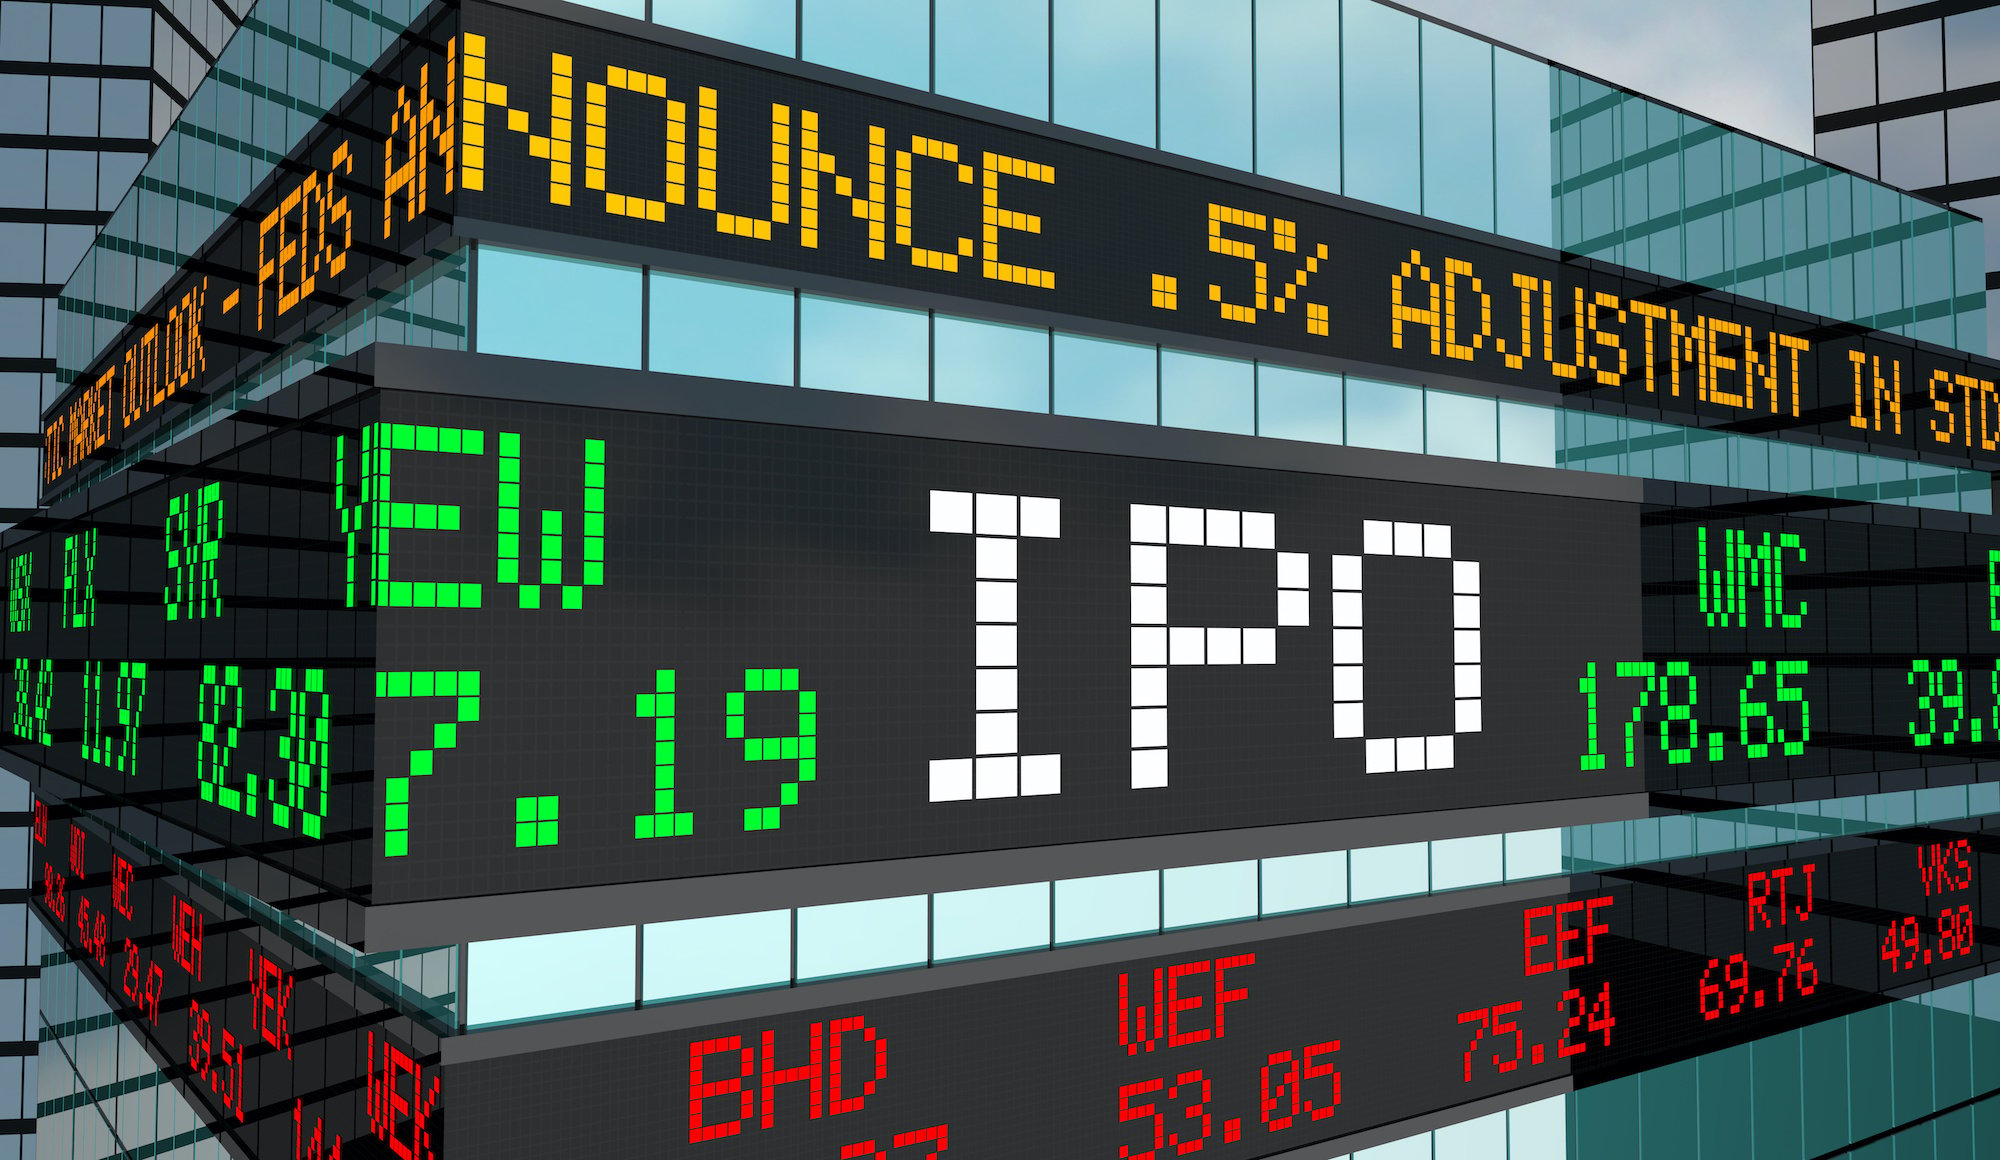 Ticker Display Software Options - Cloud or Premise-Based